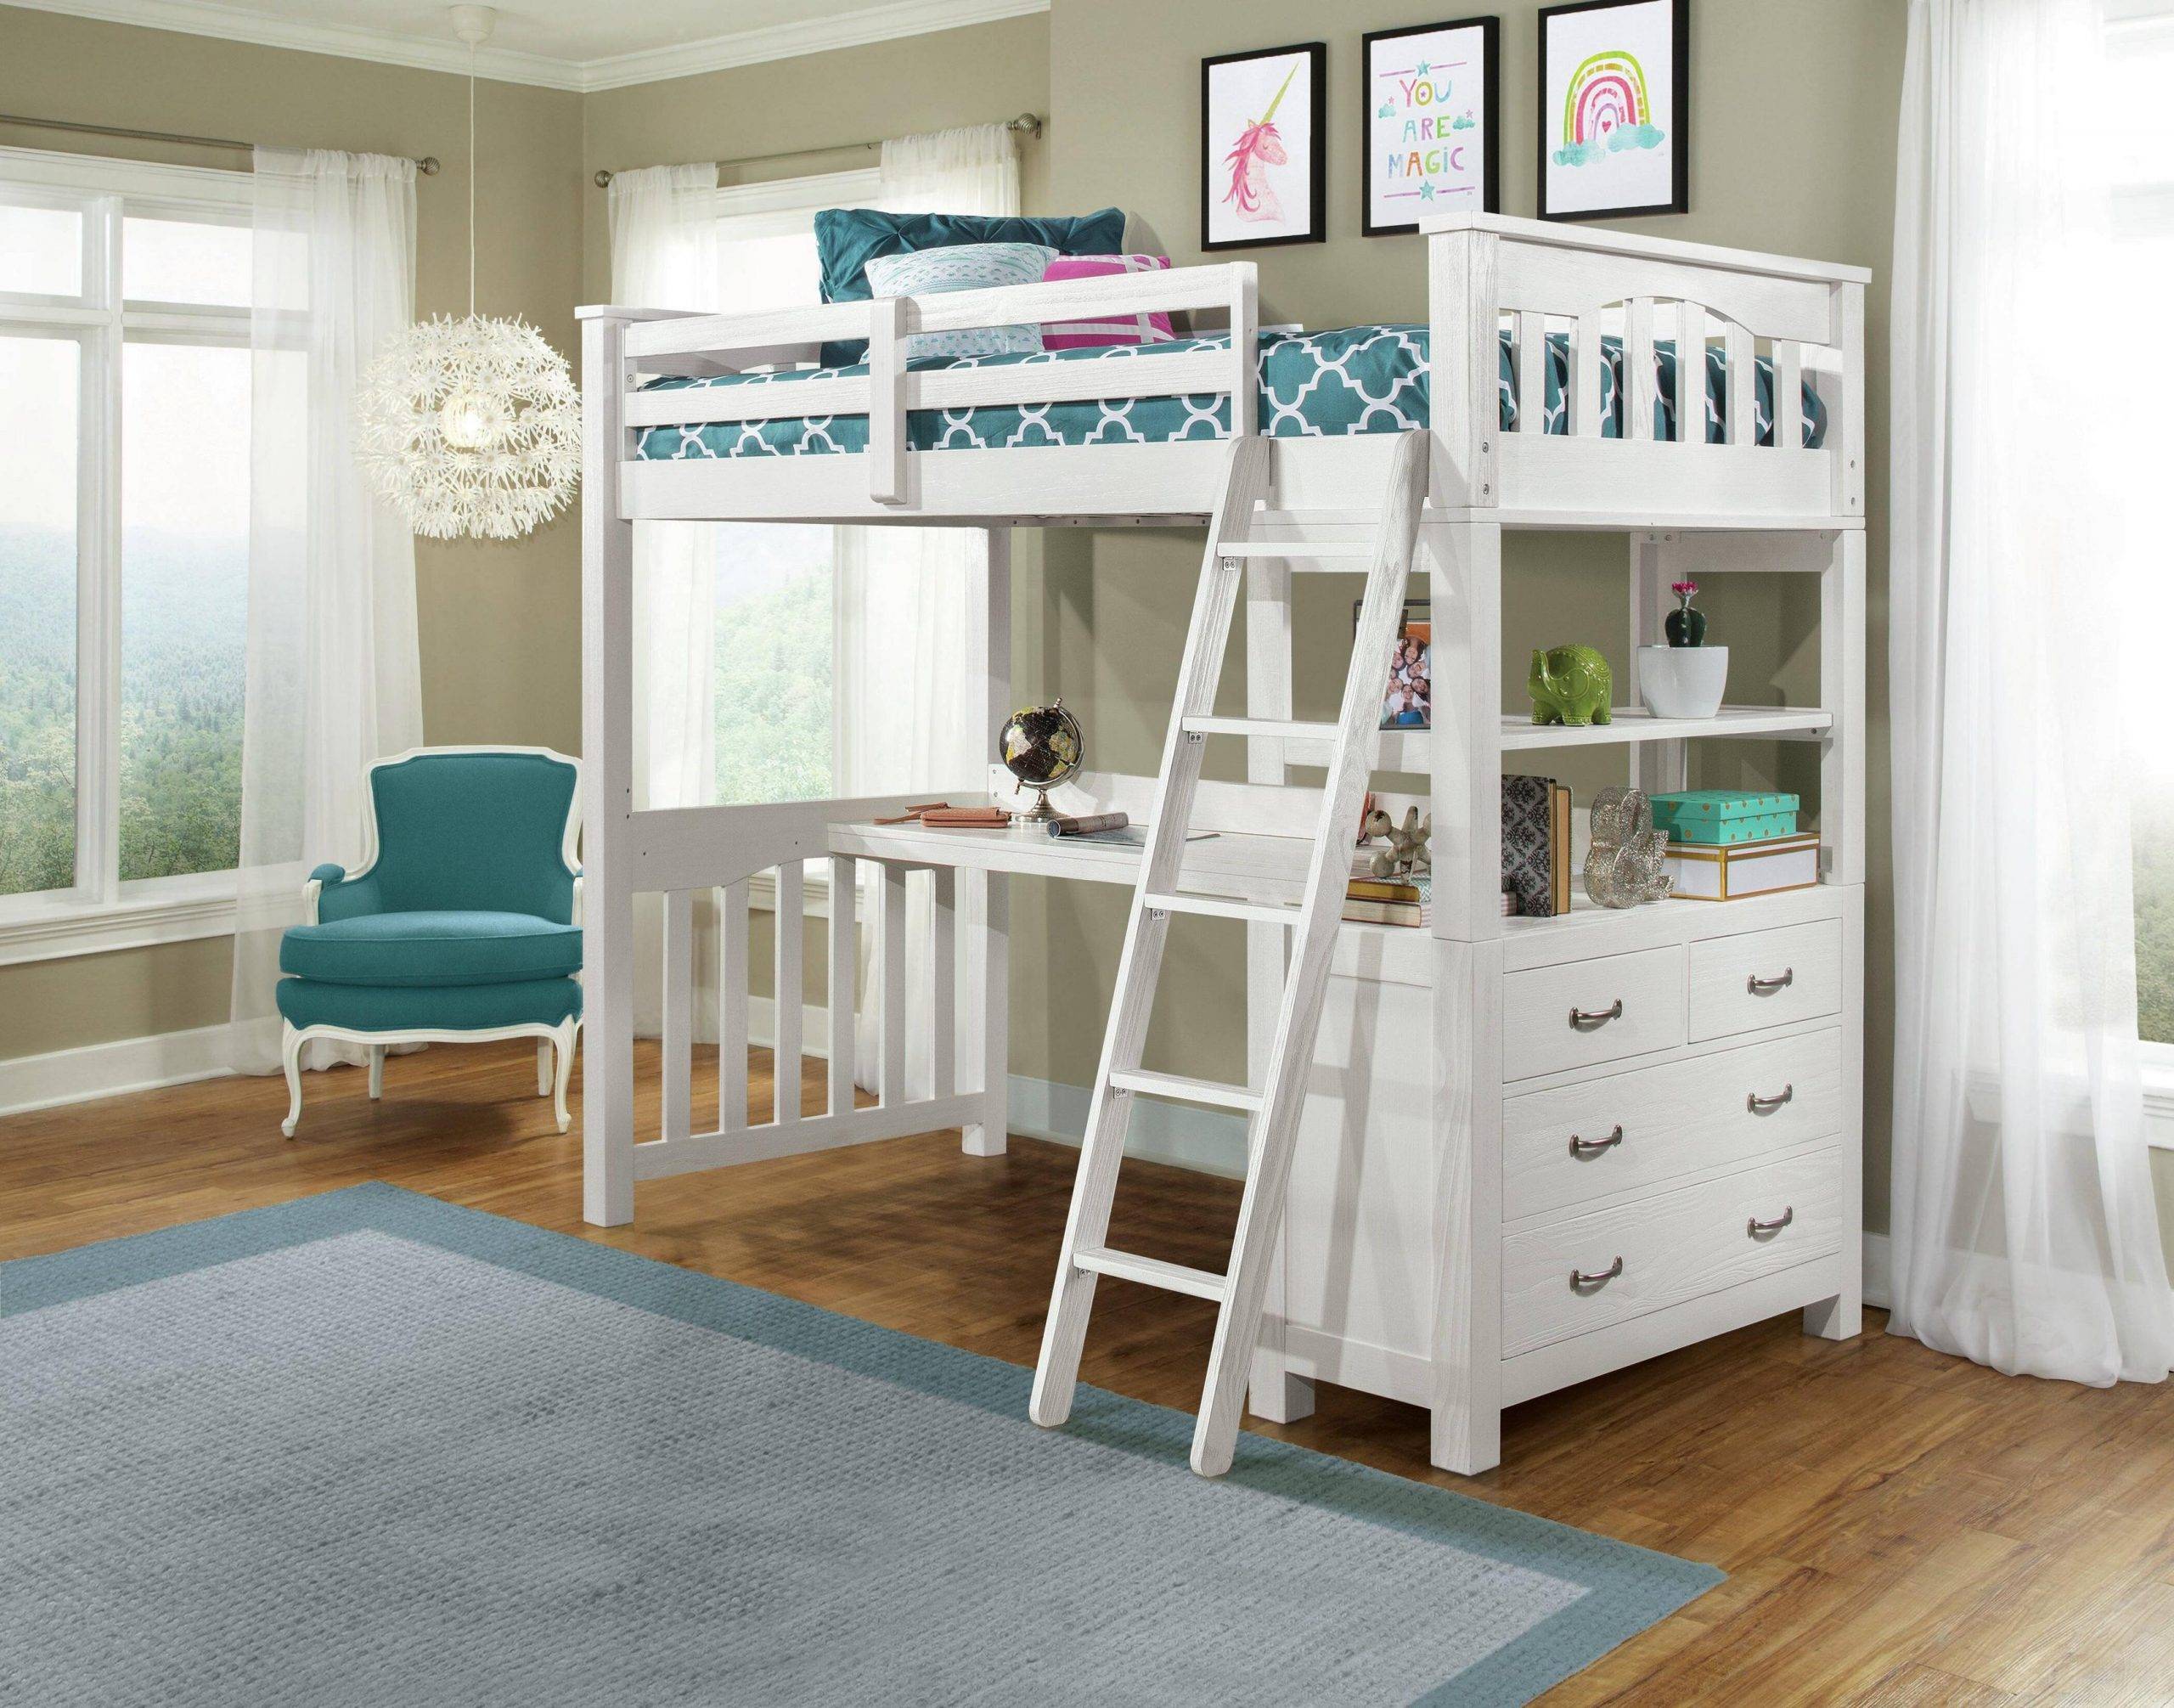 Buying a Twin Loft Bed With Desk